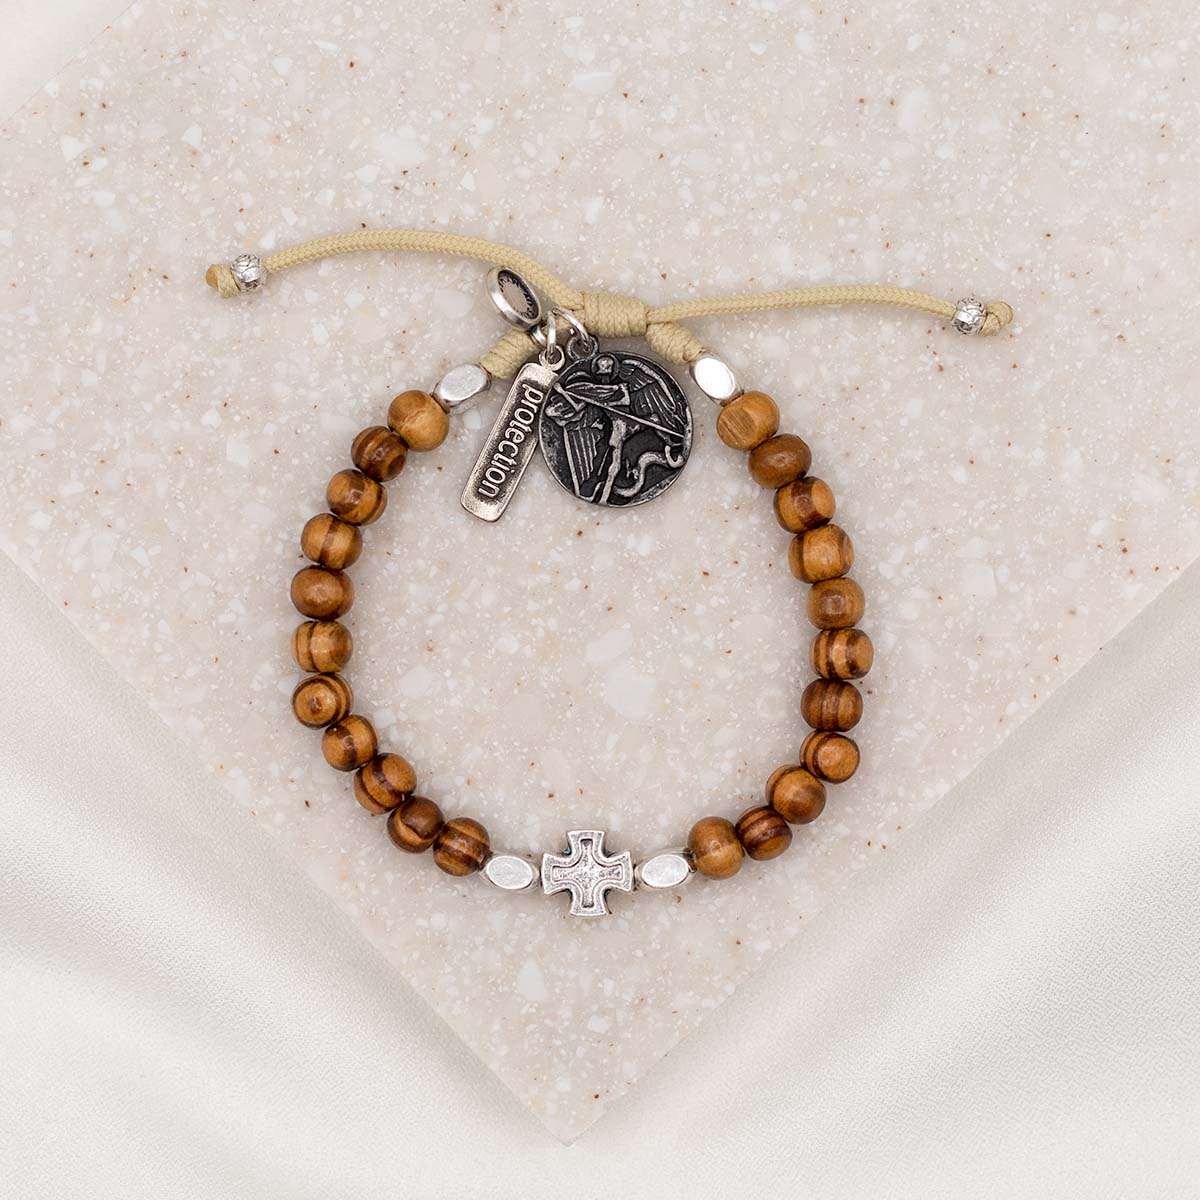 Rooted in Faith Bracelet - Archangel Michael Protection